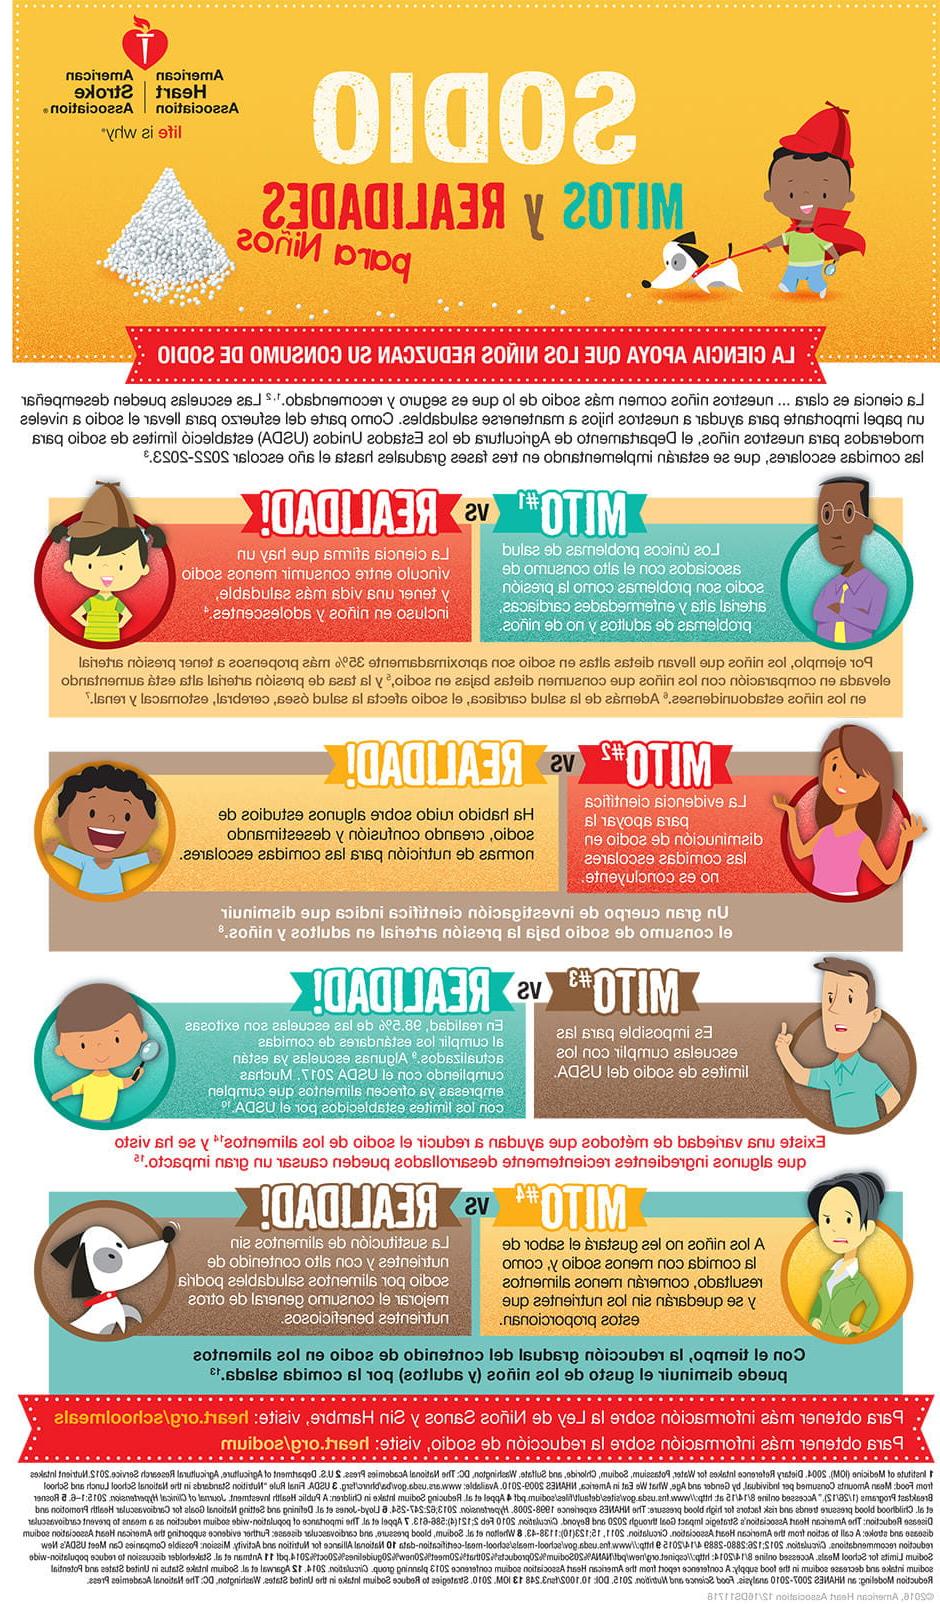 Sodium myths and facts for kids in Spanish